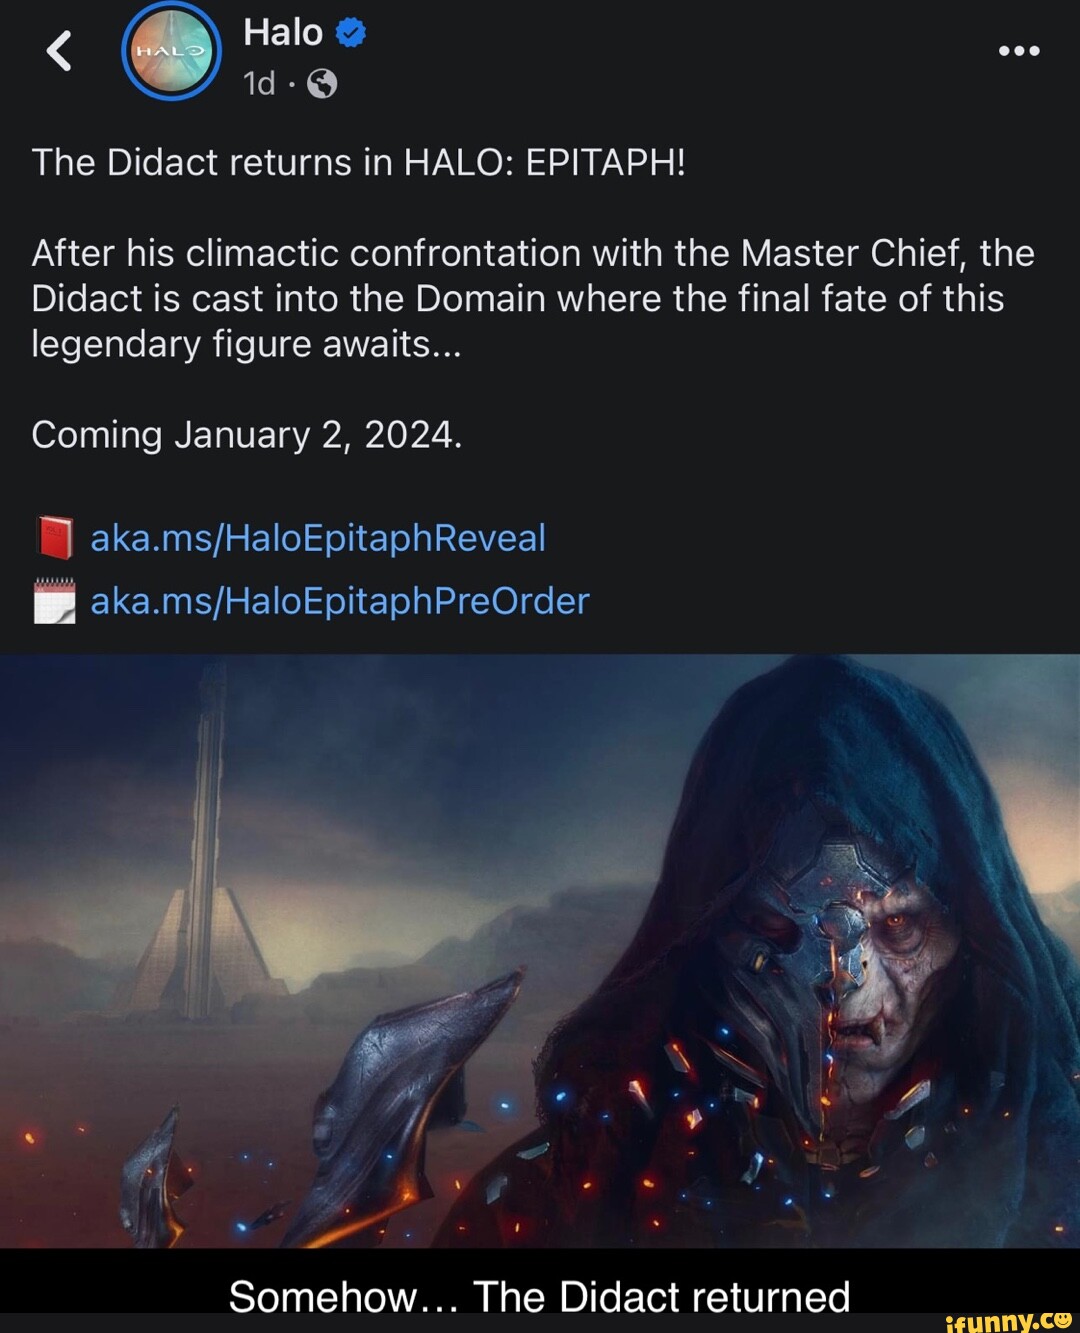 Halo id The Didact returns in HALO EPITAPH! After his climactic